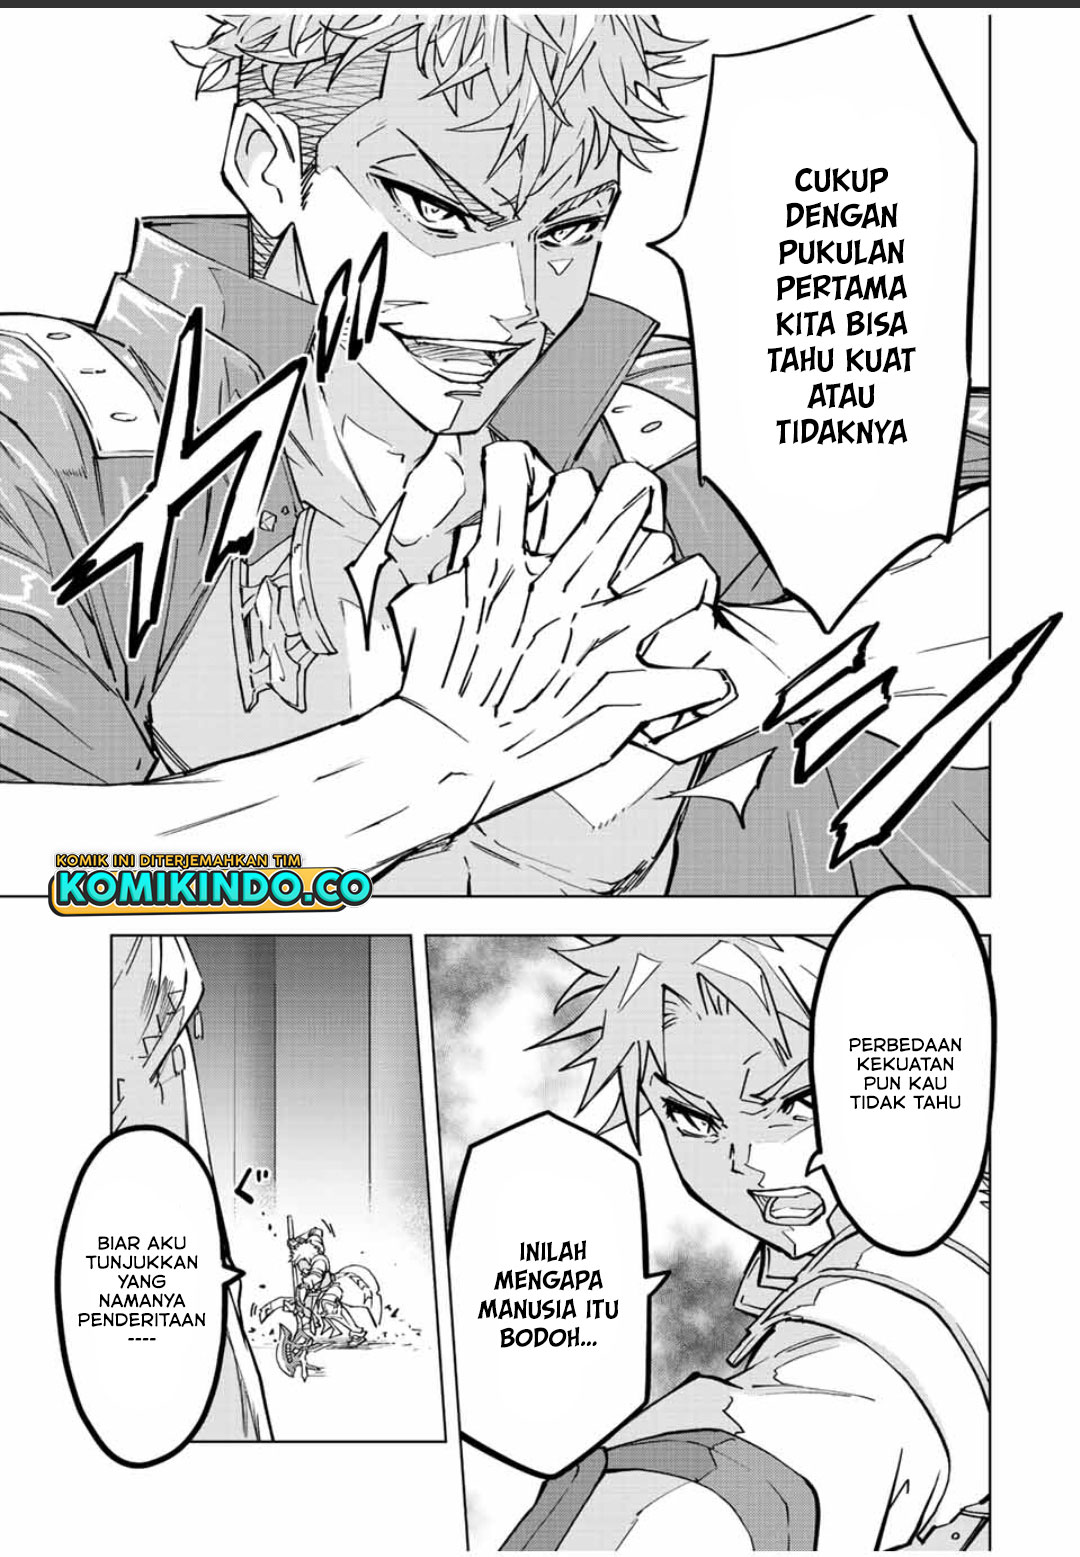 My Gift LVL 9999 Unlimited Gacha Chapter 38 Bahasa Indonesia